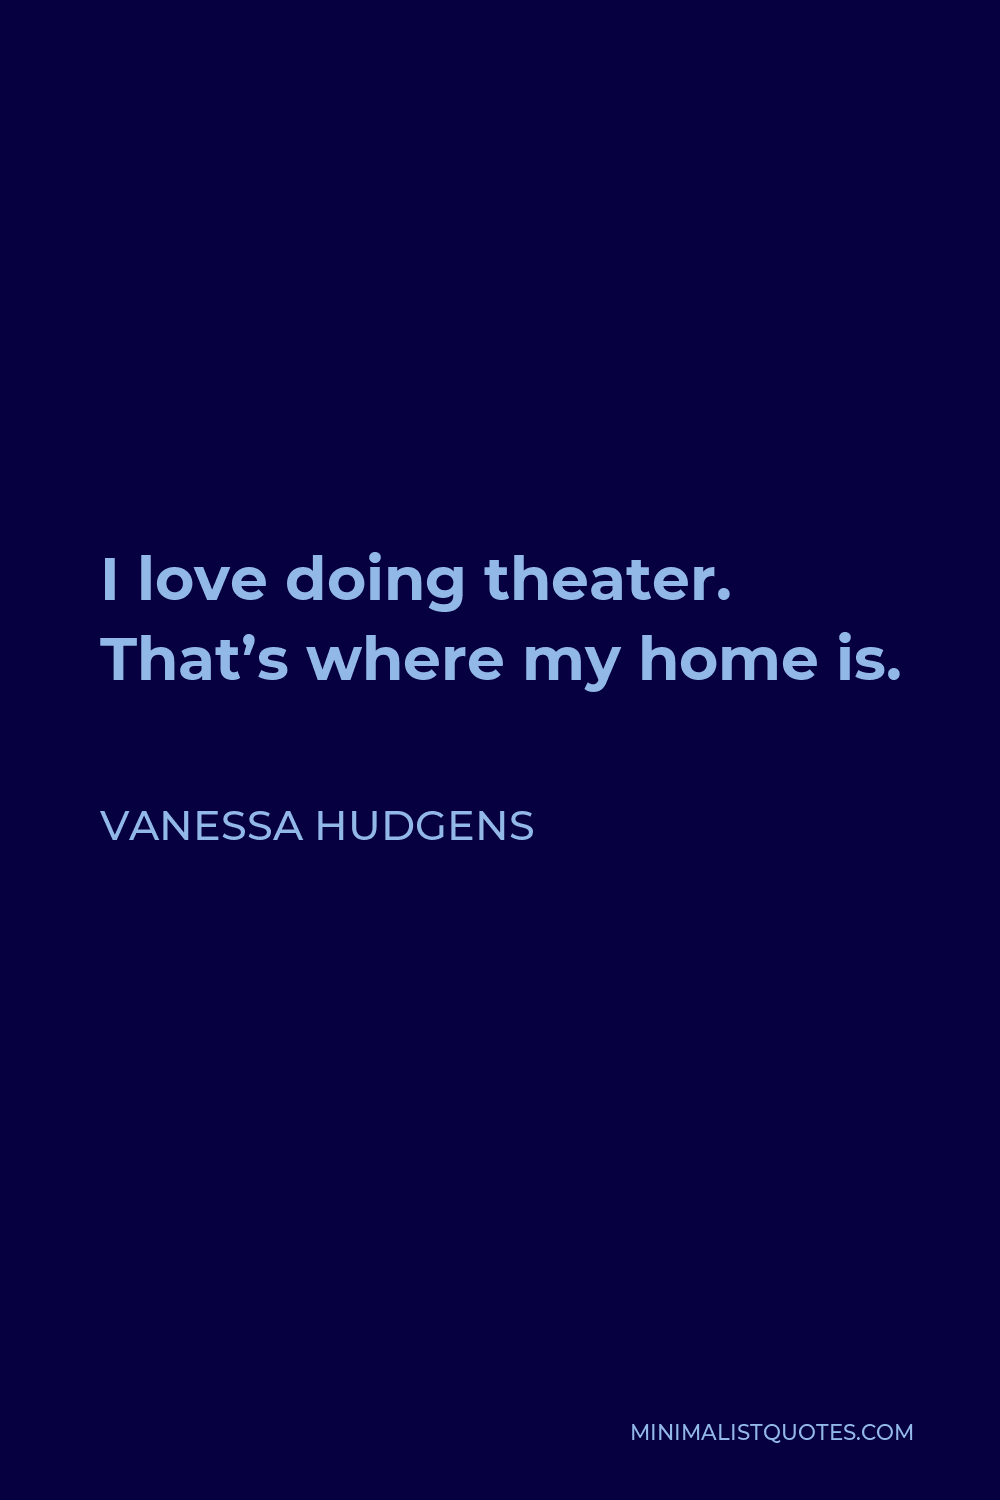 Vanessa Hudgens Quote - I love doing theater. That’s where my home is.